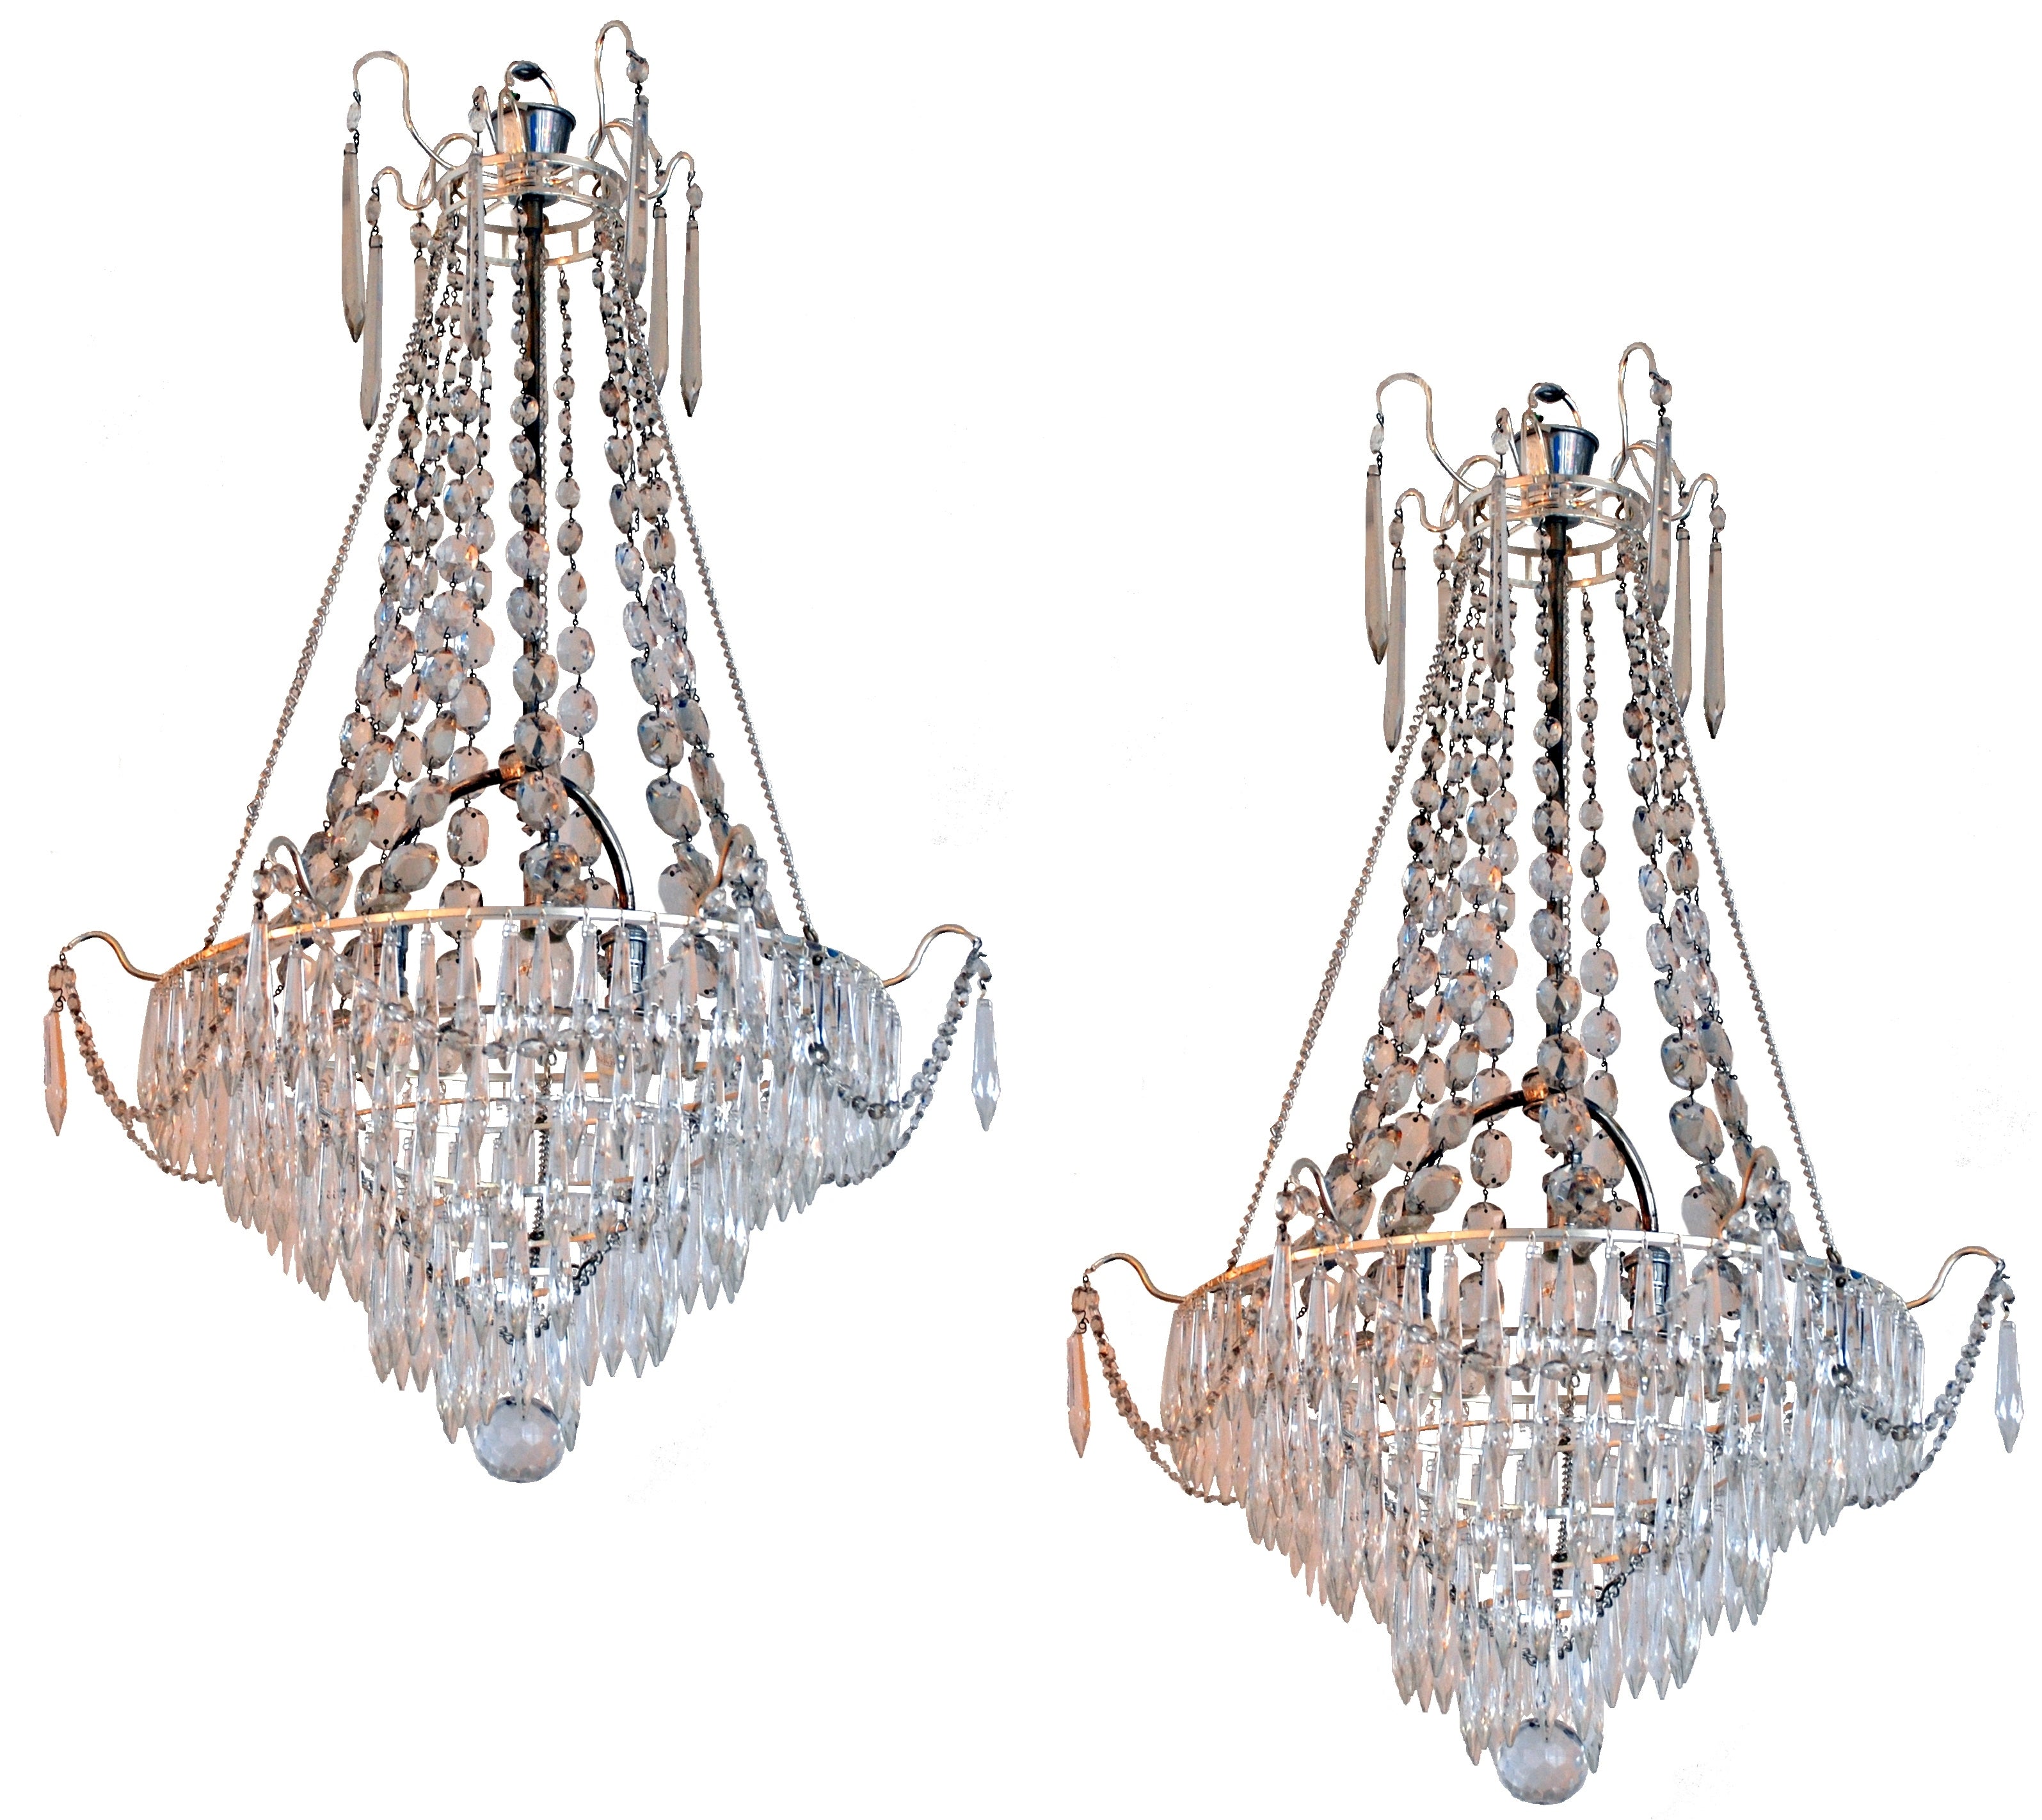 A Pair of Gustavian Style Cut Glass Chandeliers Circa 1920's